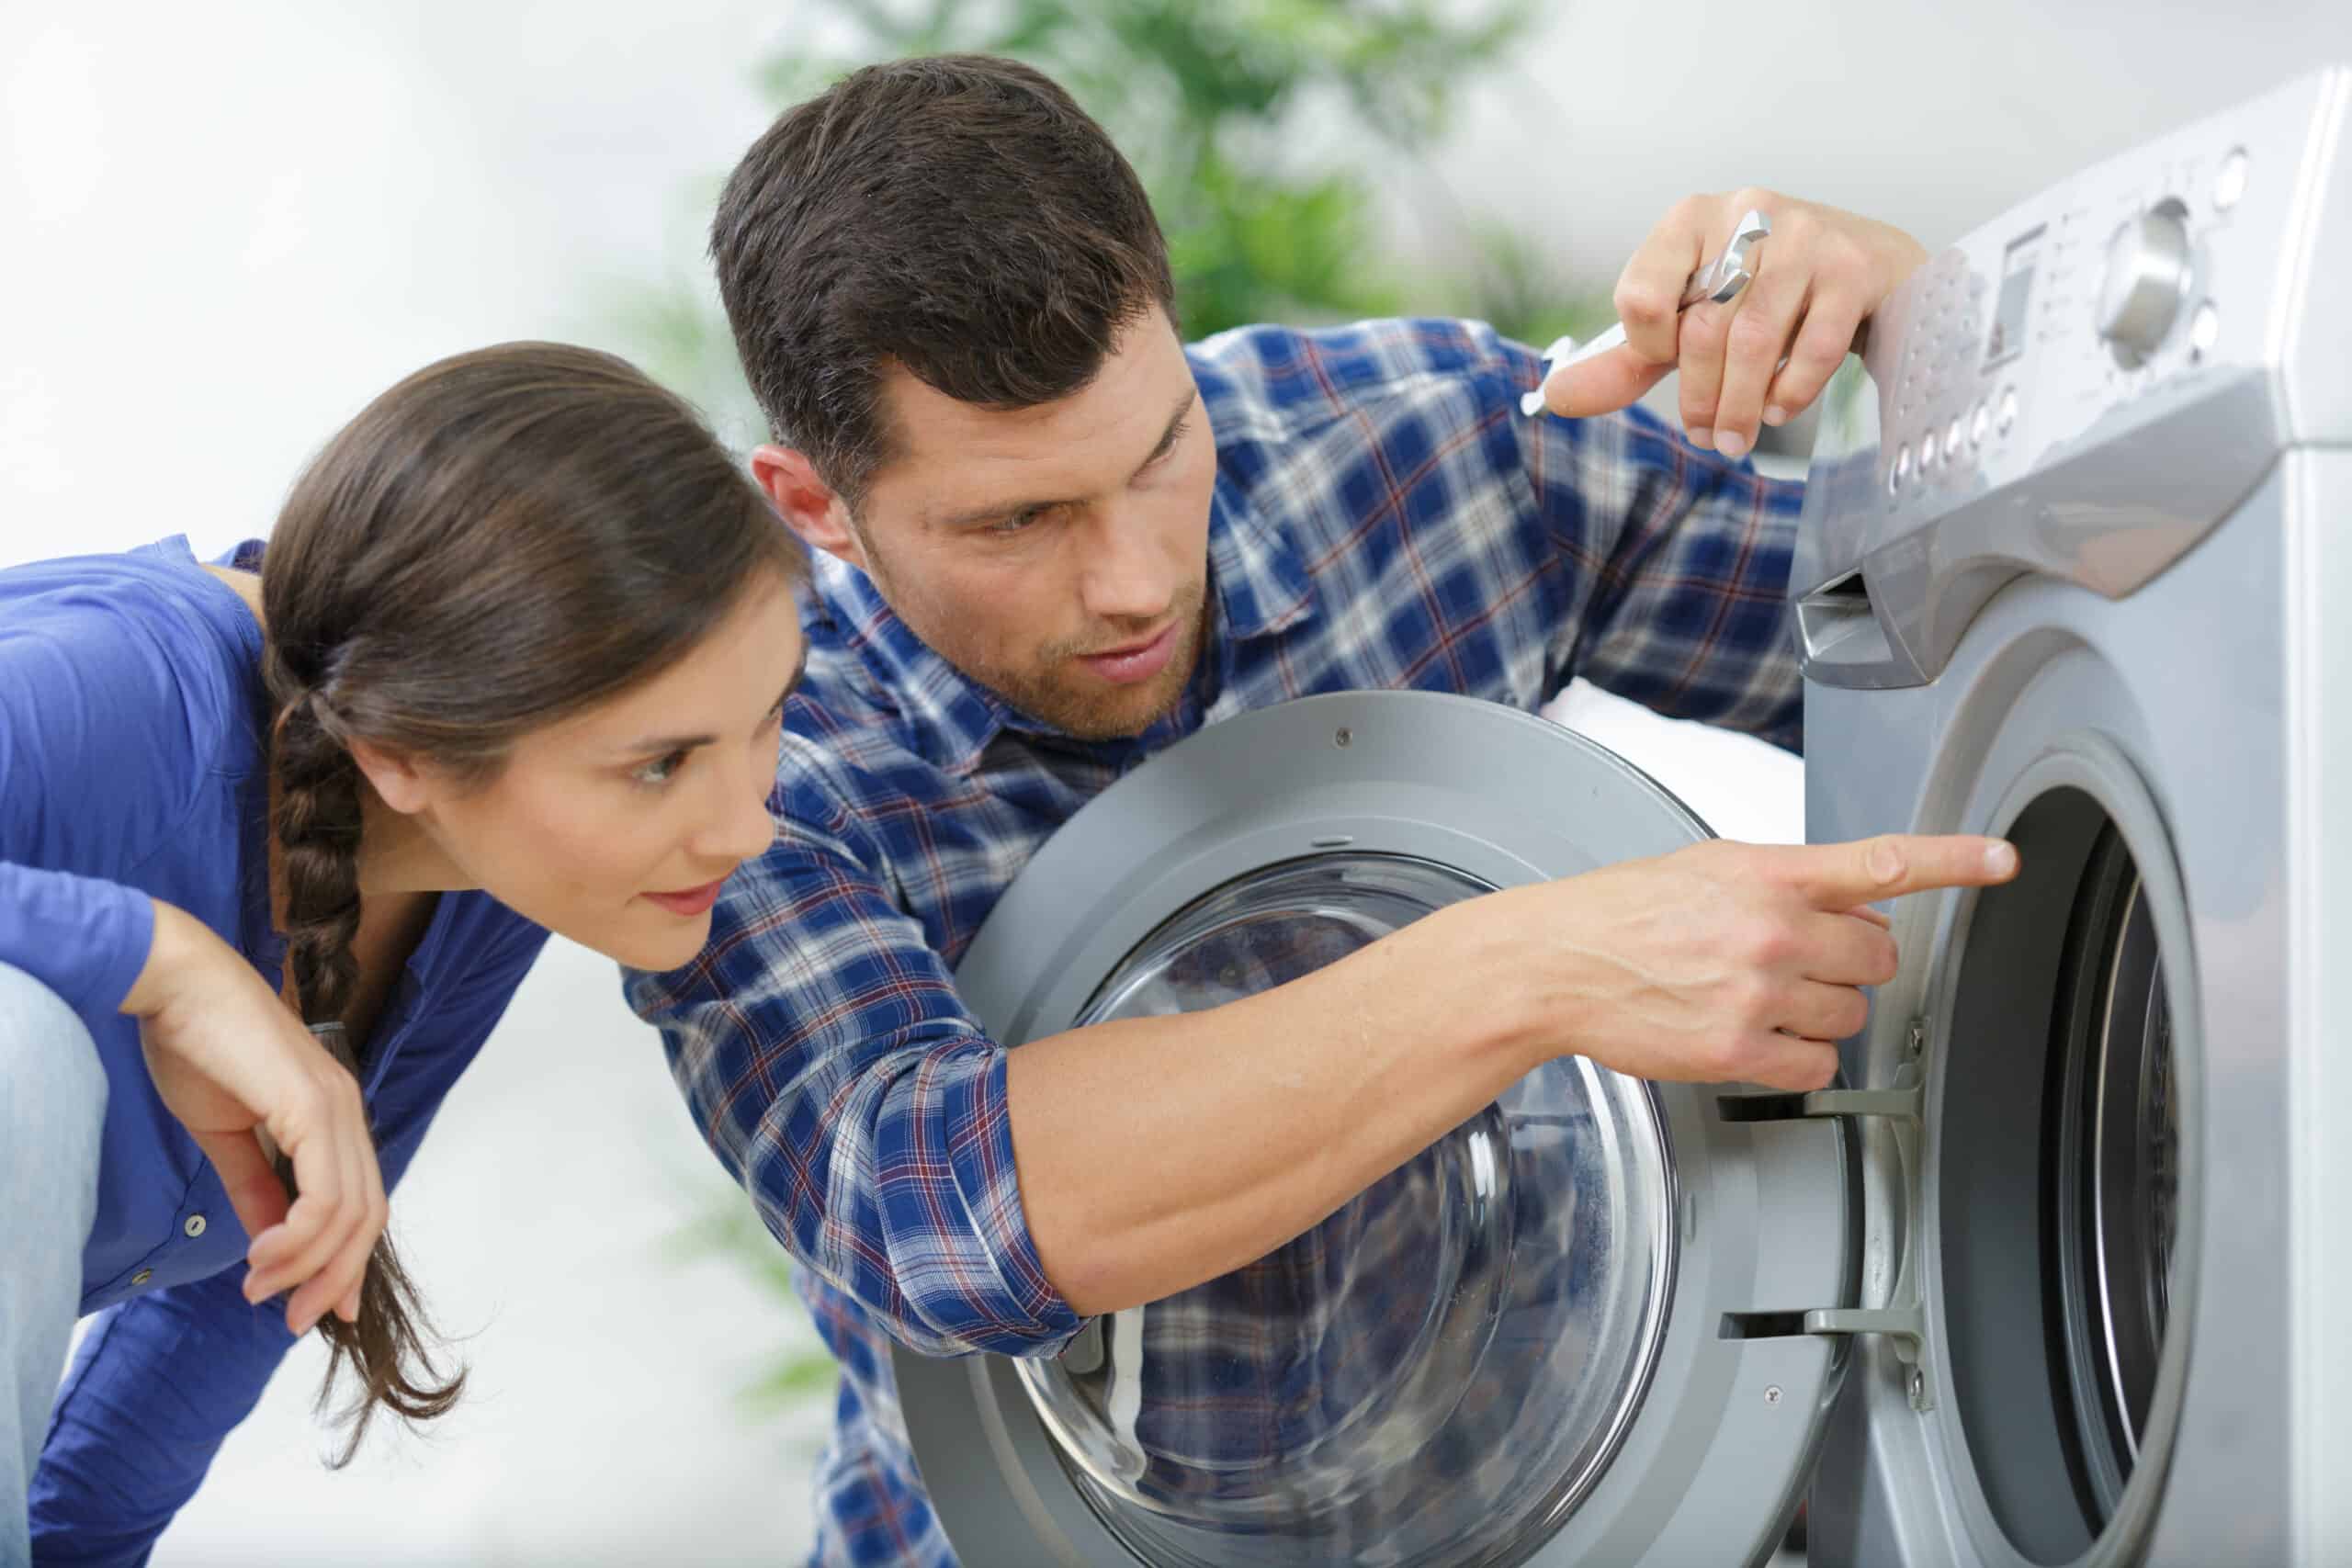 Should You Repair or Replace Your Appliance?